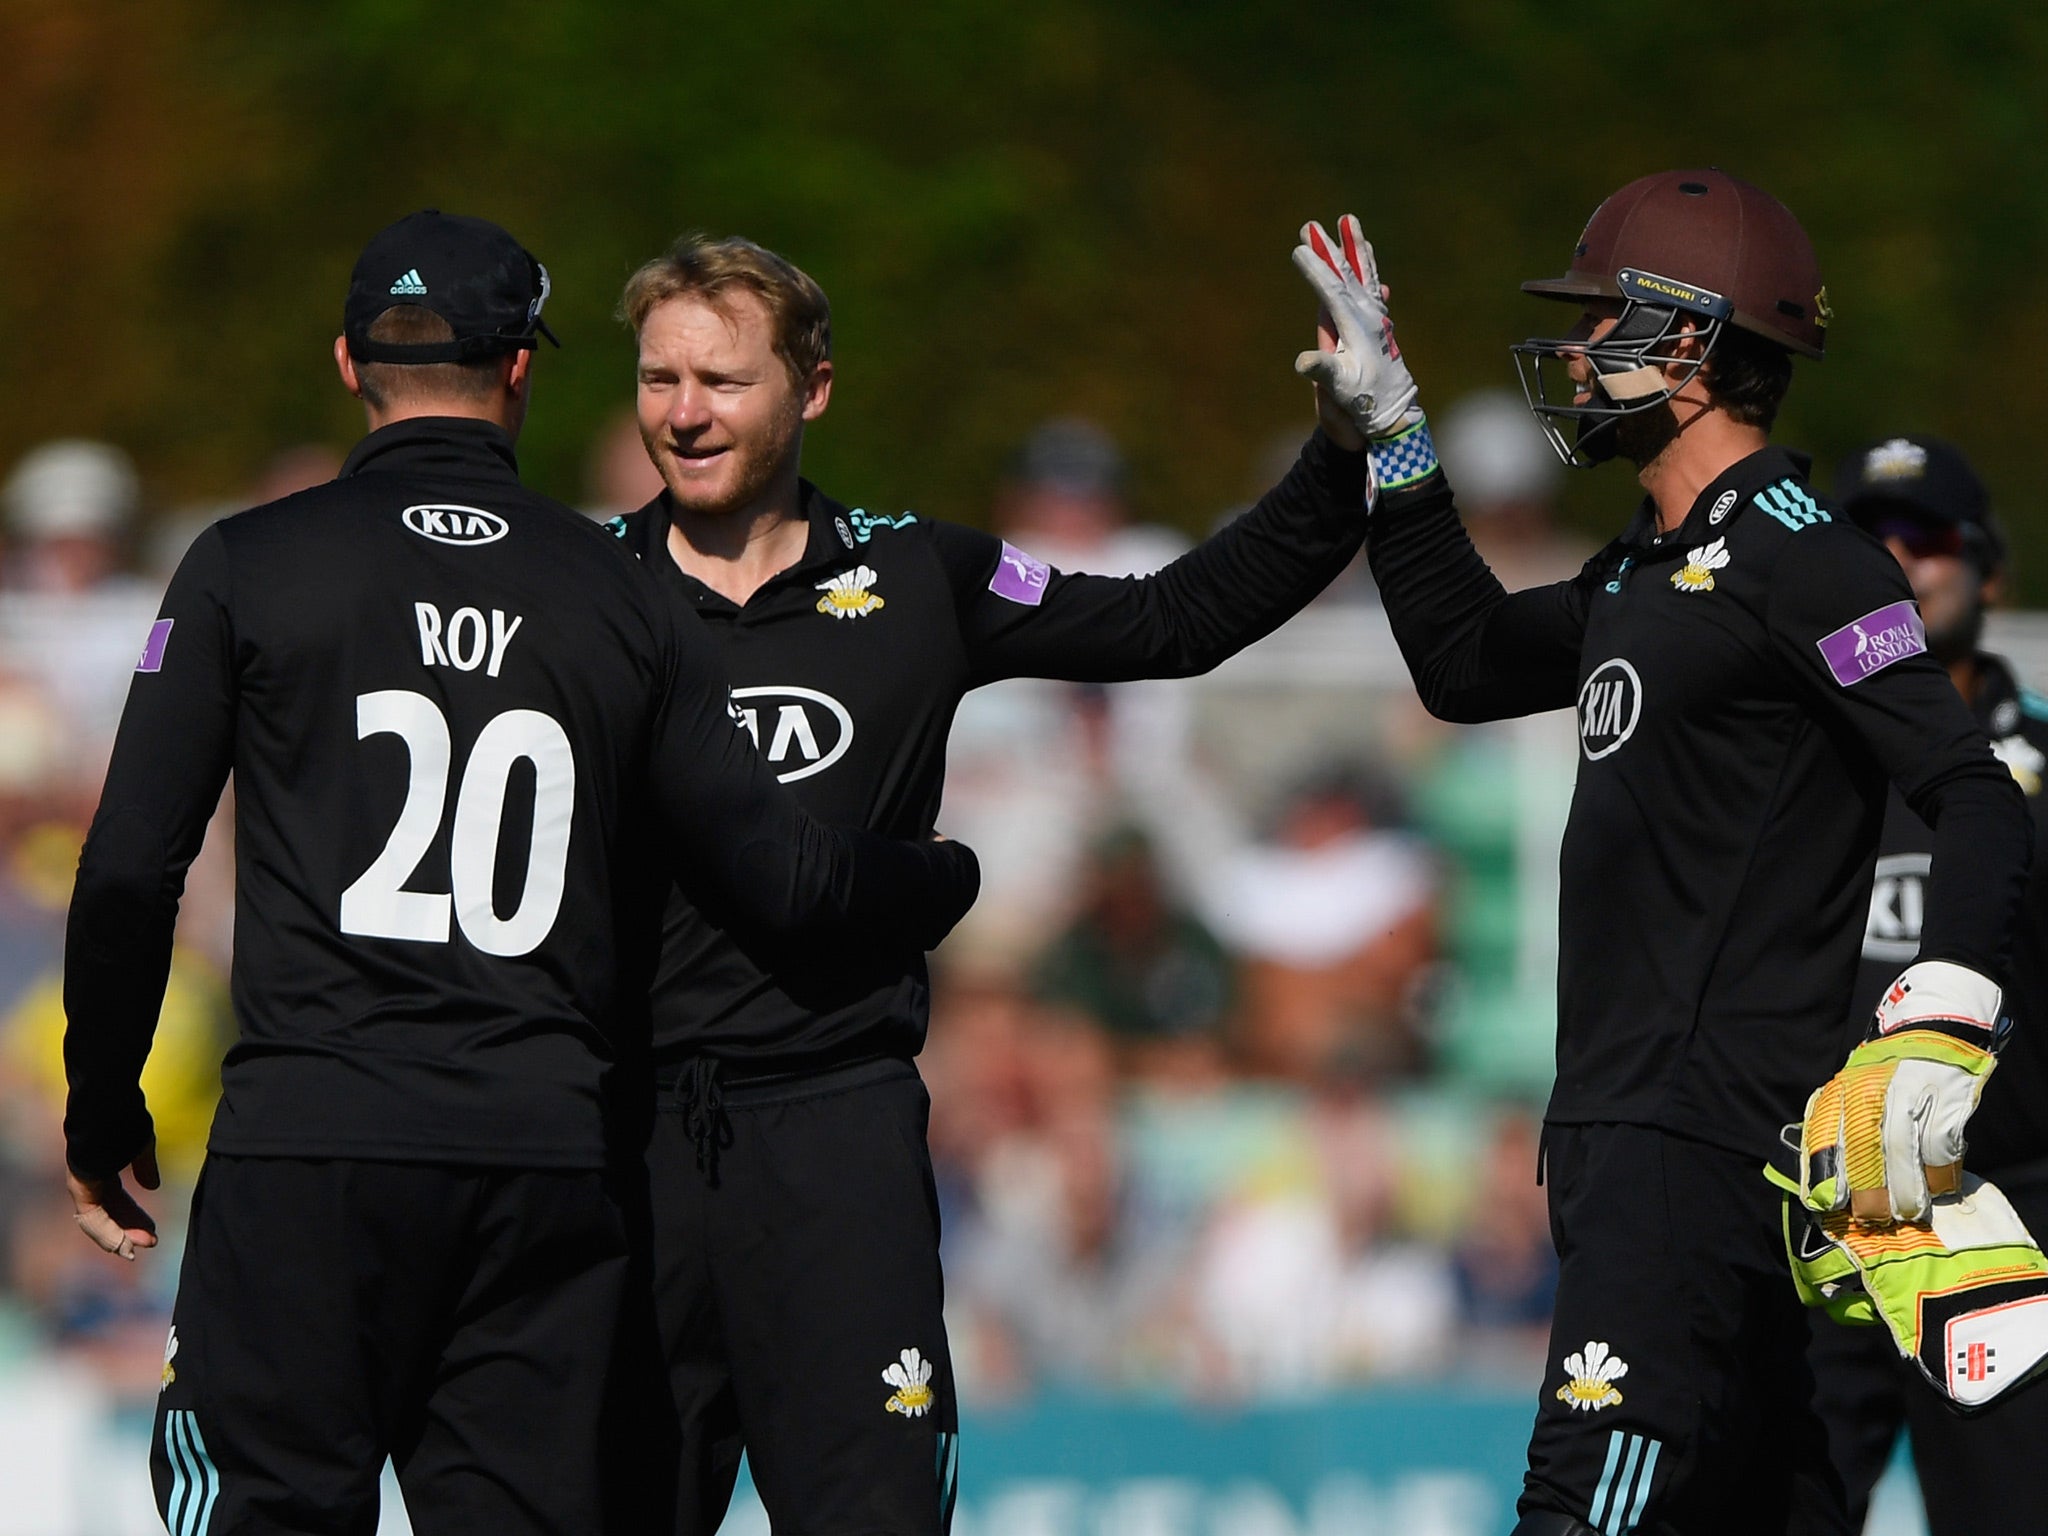 Surrey are in the final for a third consecutive year